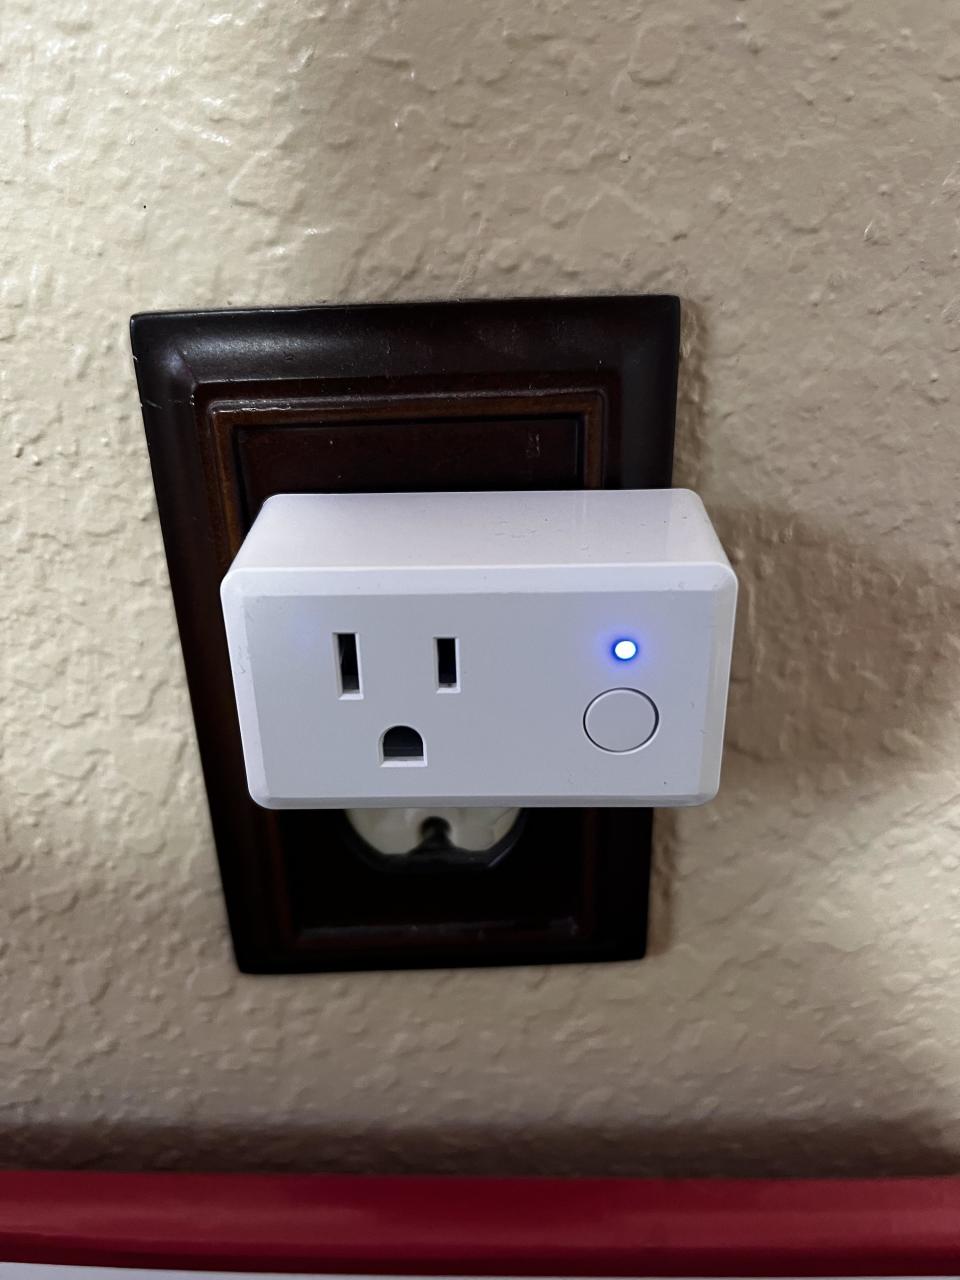 smart wifi plug in an outlet, light blinked "on"